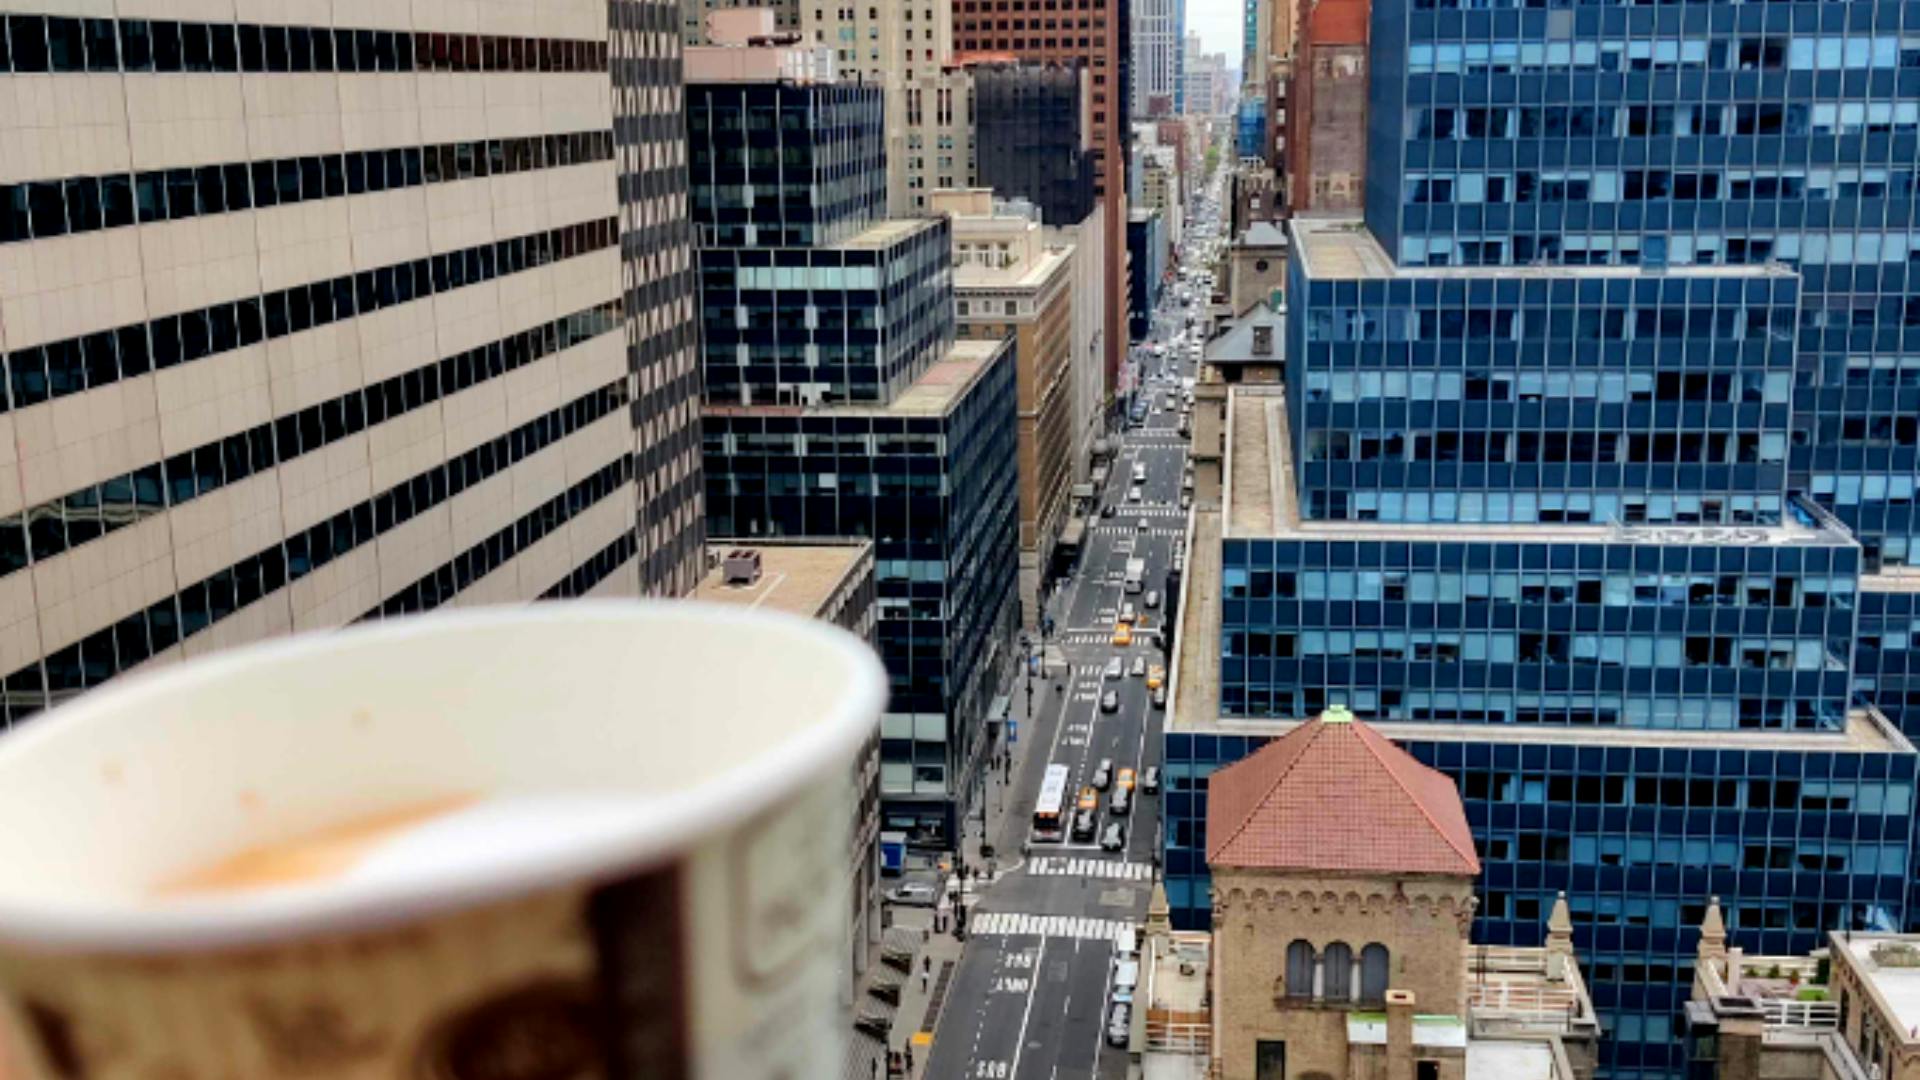 Having coffee with a New York view - Mosano